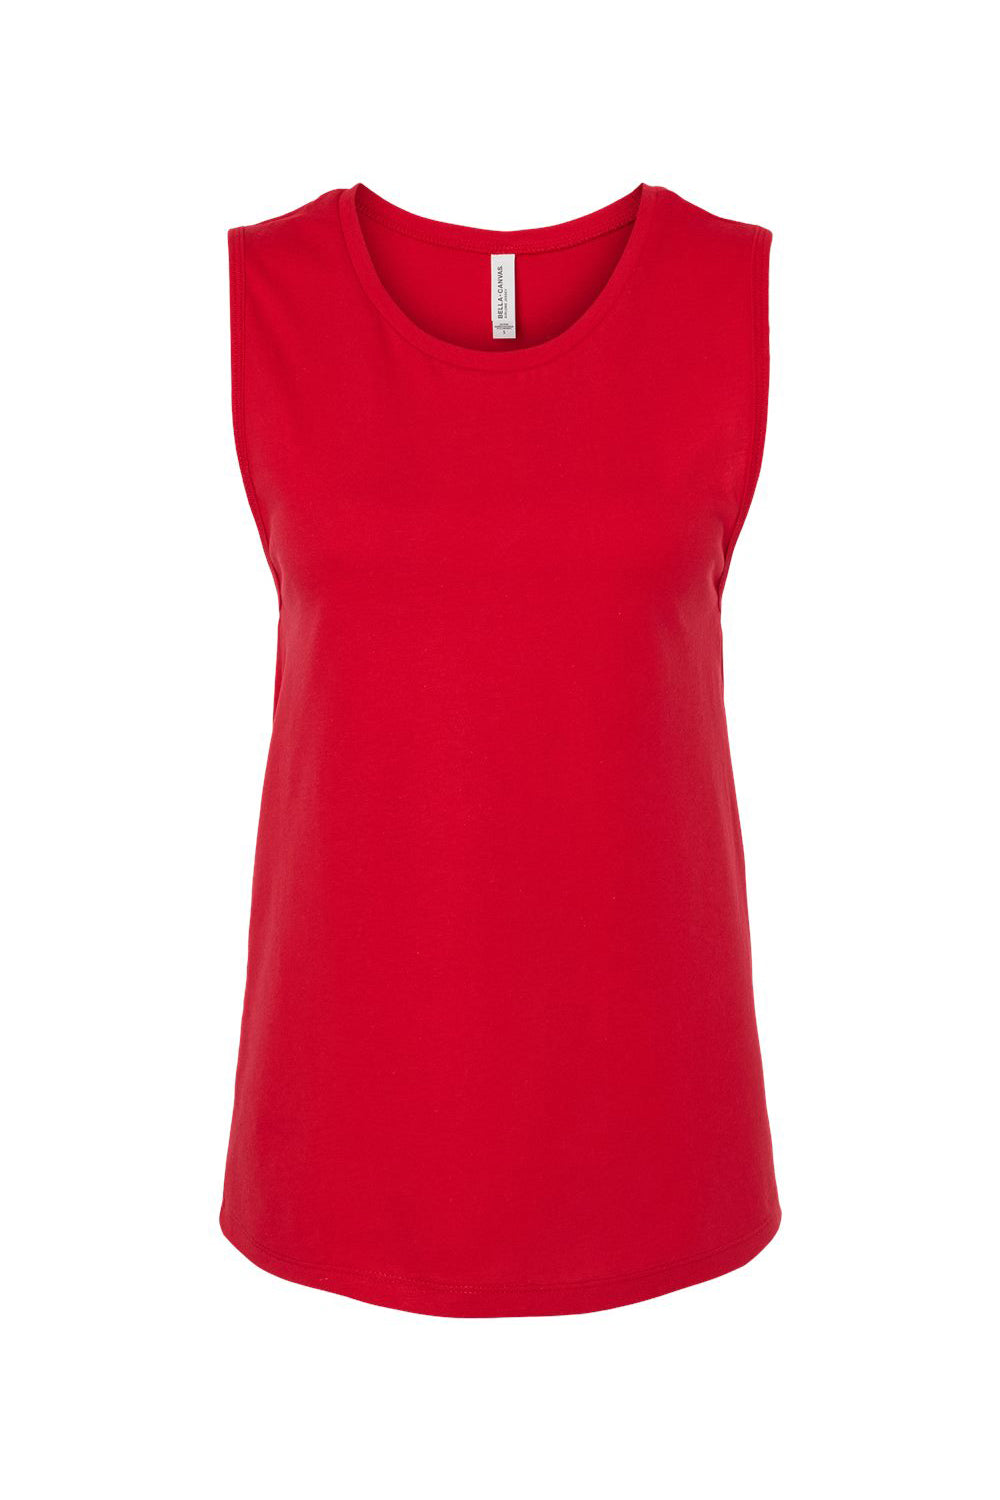 Bella + Canvas BC6003/B6003/6003 Womens Jersey Muscle Tank Top Red Flat Front